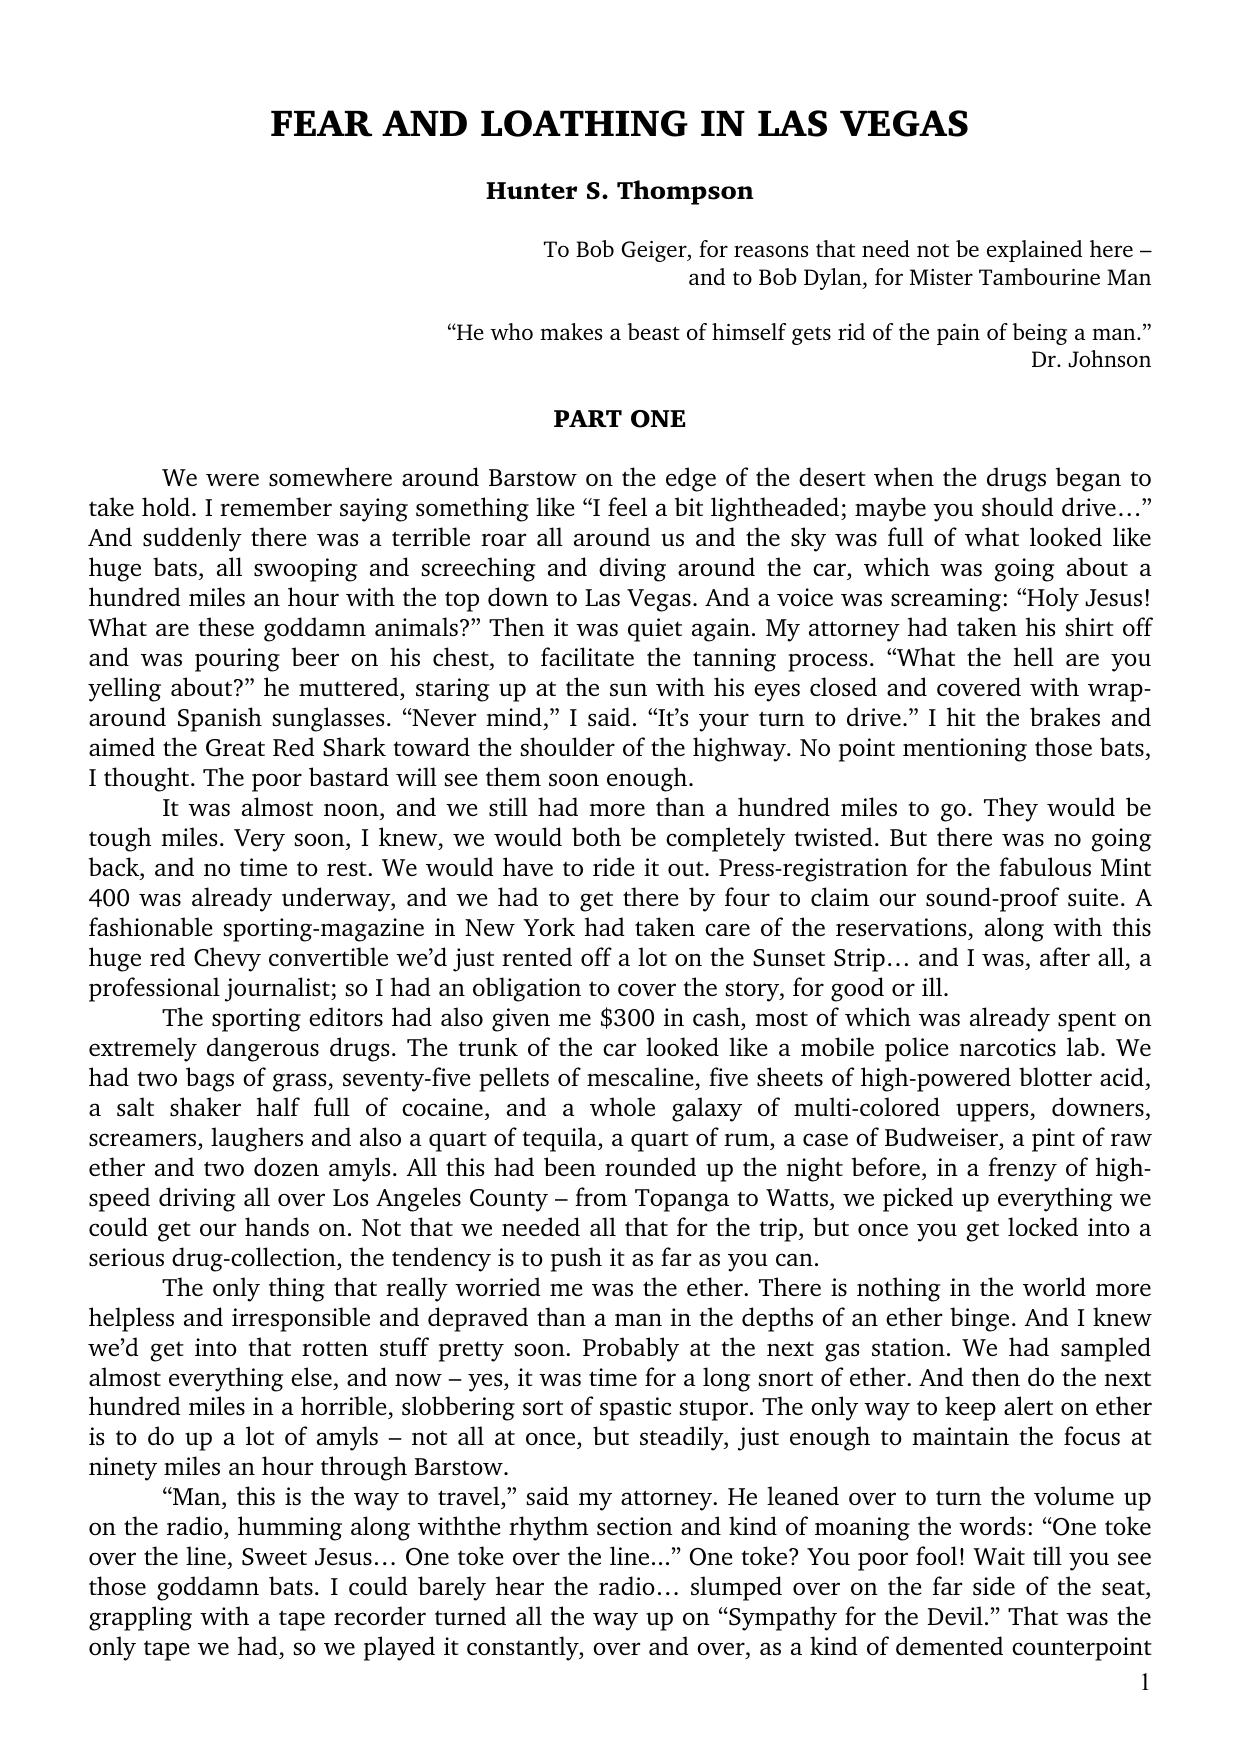 Microsoft Word - Hunter S Thompson - Fear and Loathing in Las Vegas.doc